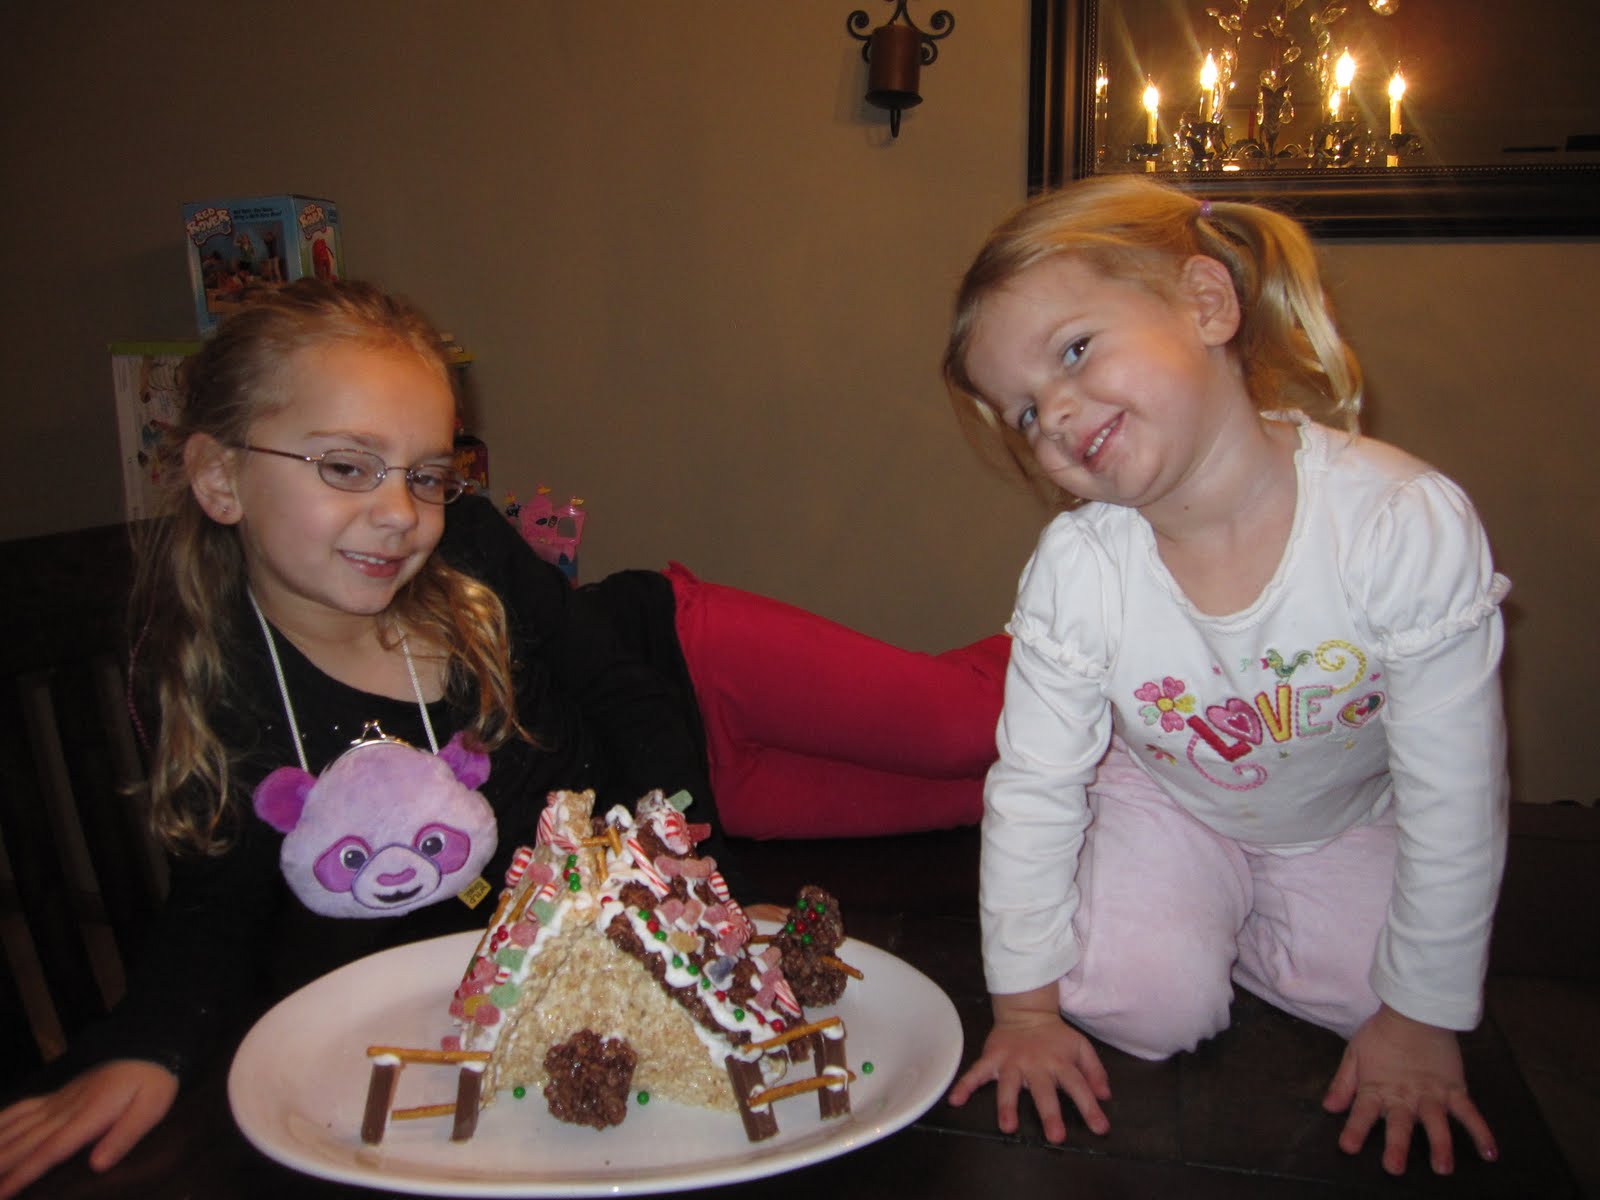 two daughters, one son: Gingerbread house